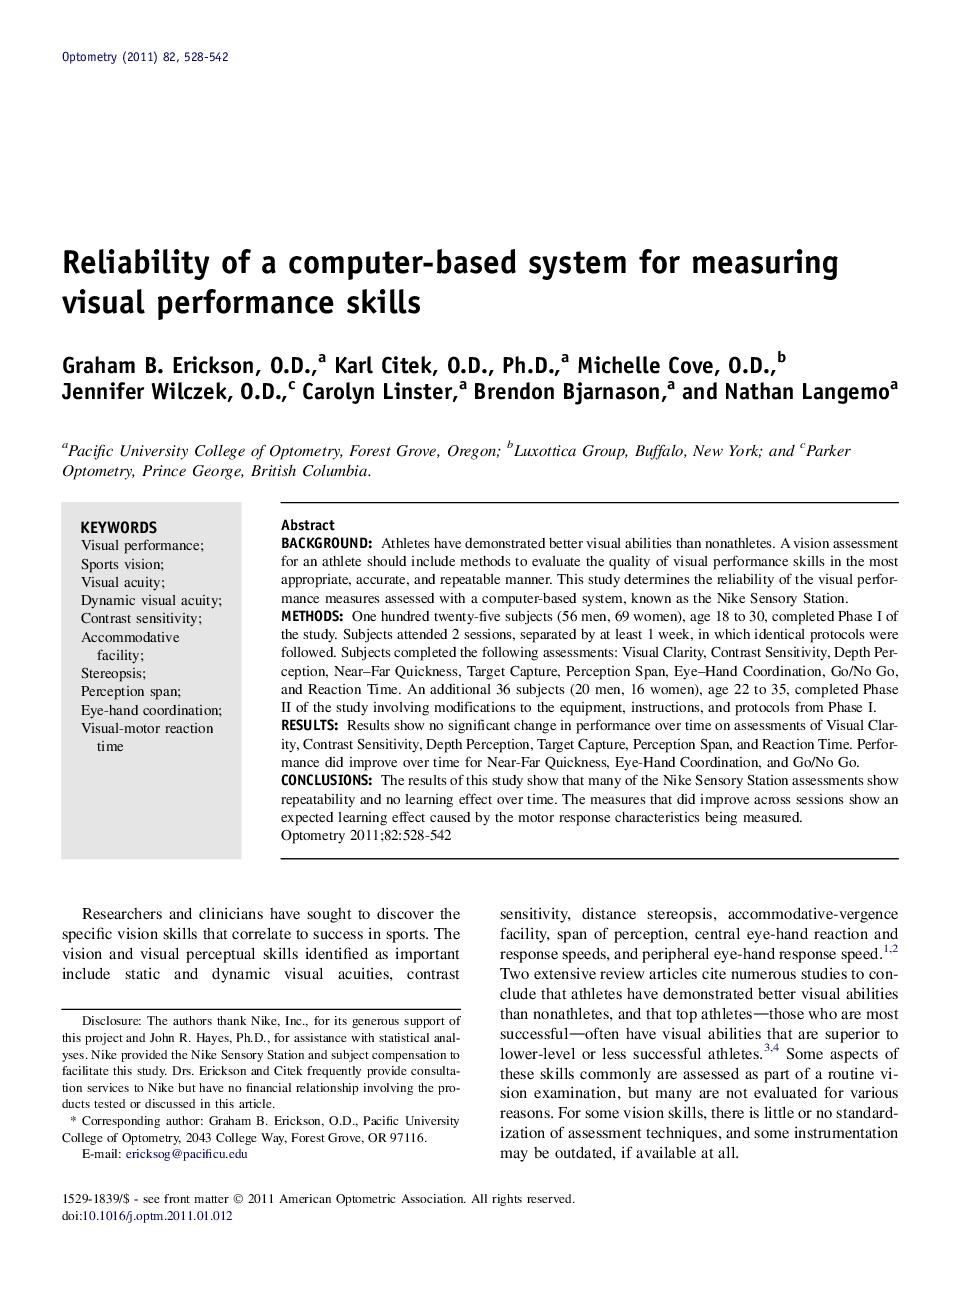 Reliability of a computer-based system for measuring visual performance skills 